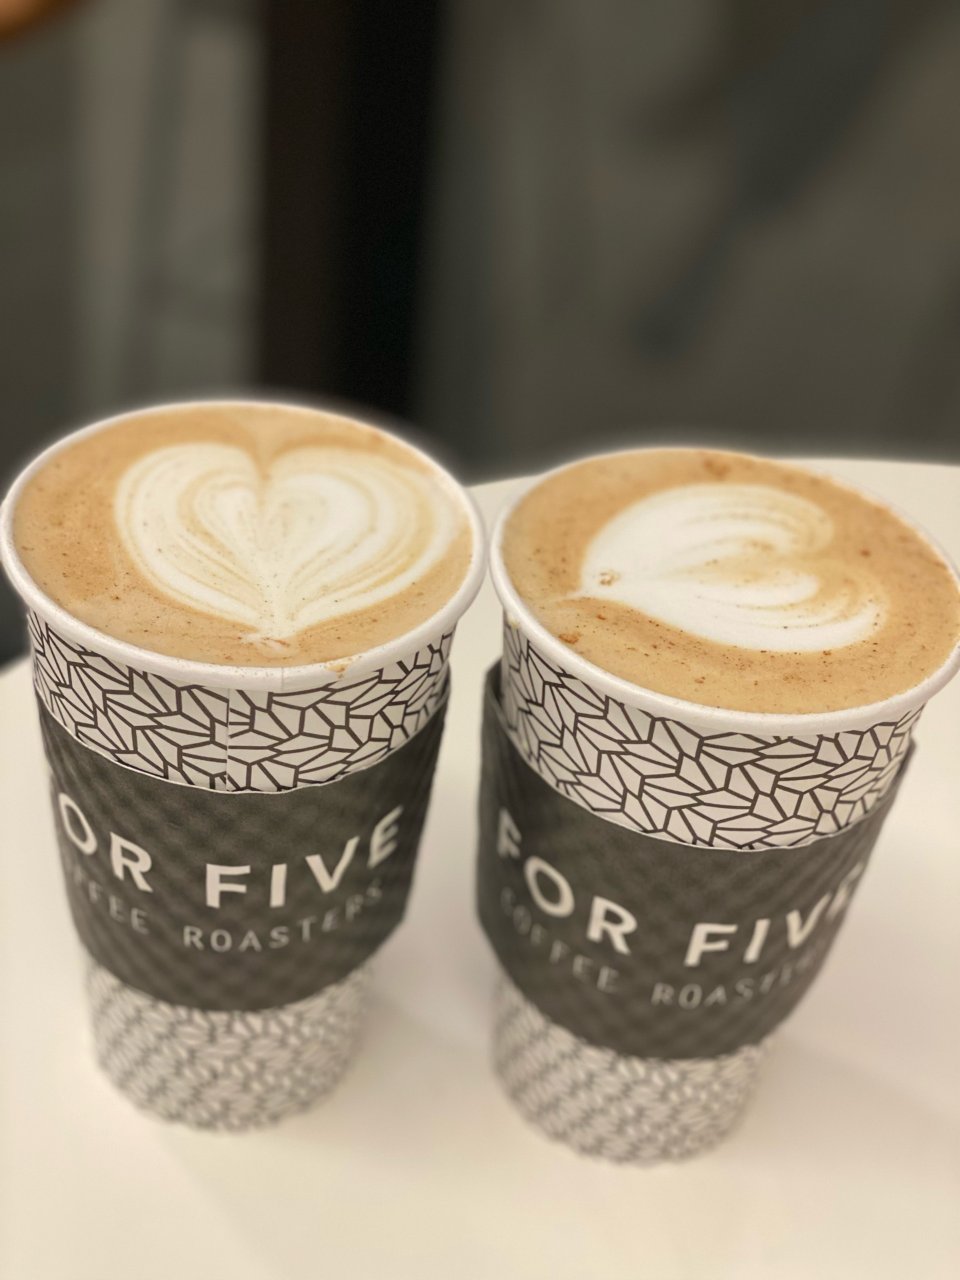 NY 咖啡探店｜ For Five...